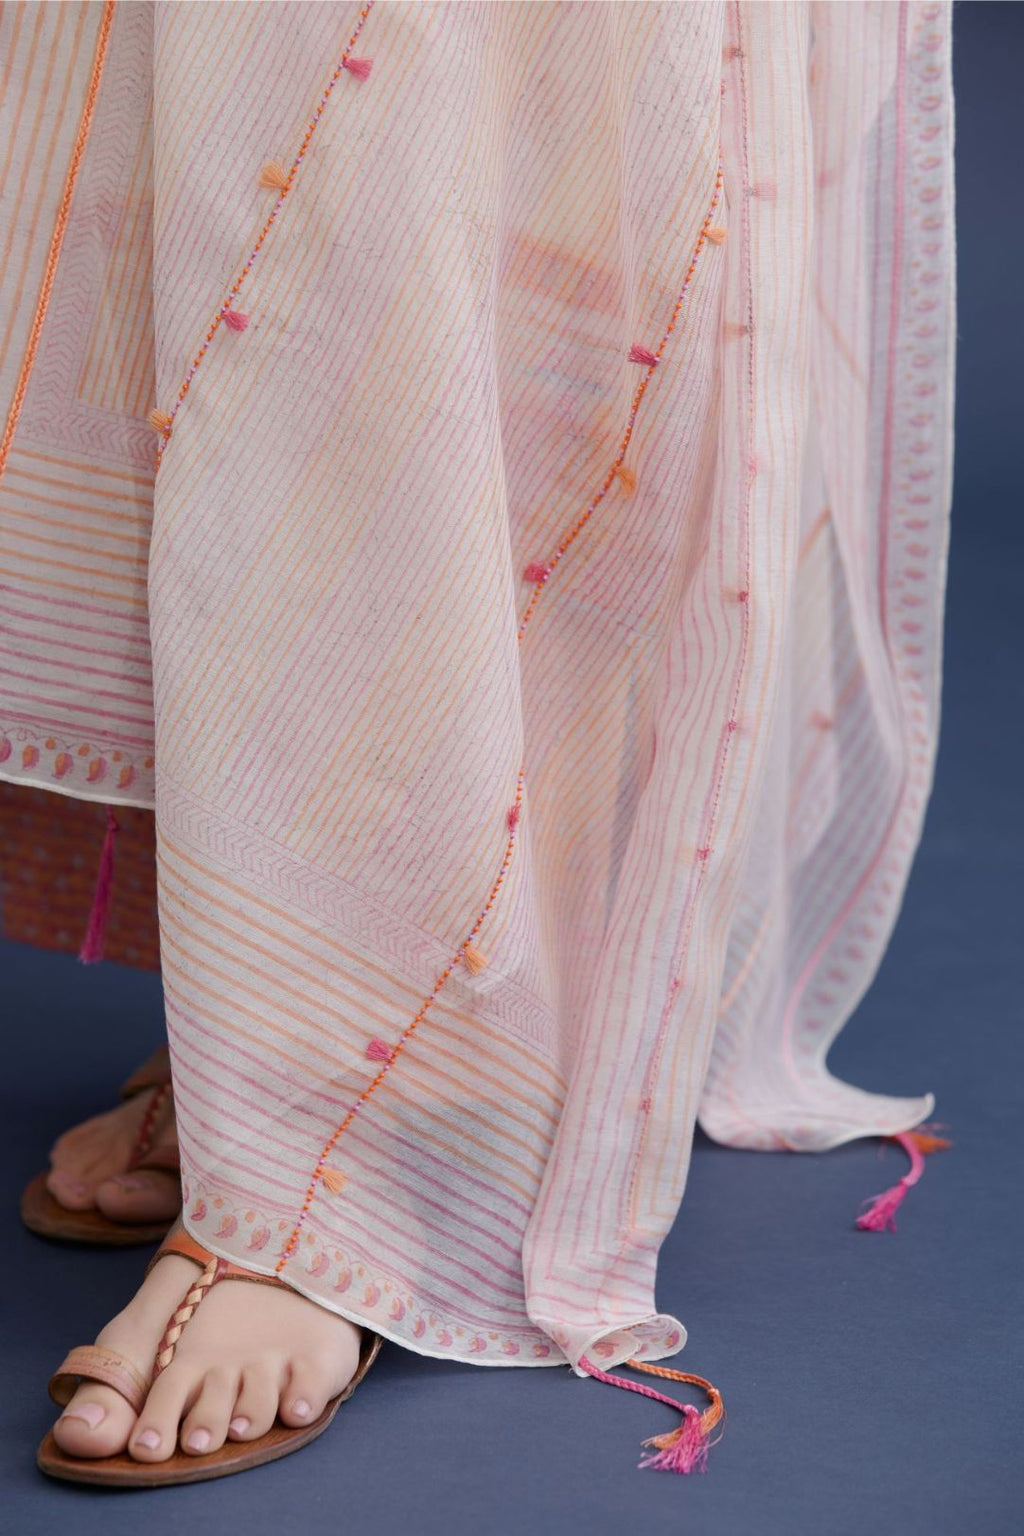 Off white cotton Chanderi dupatta with all over pink and orange hand block print, highlighted with bead and thread tassel embroidery